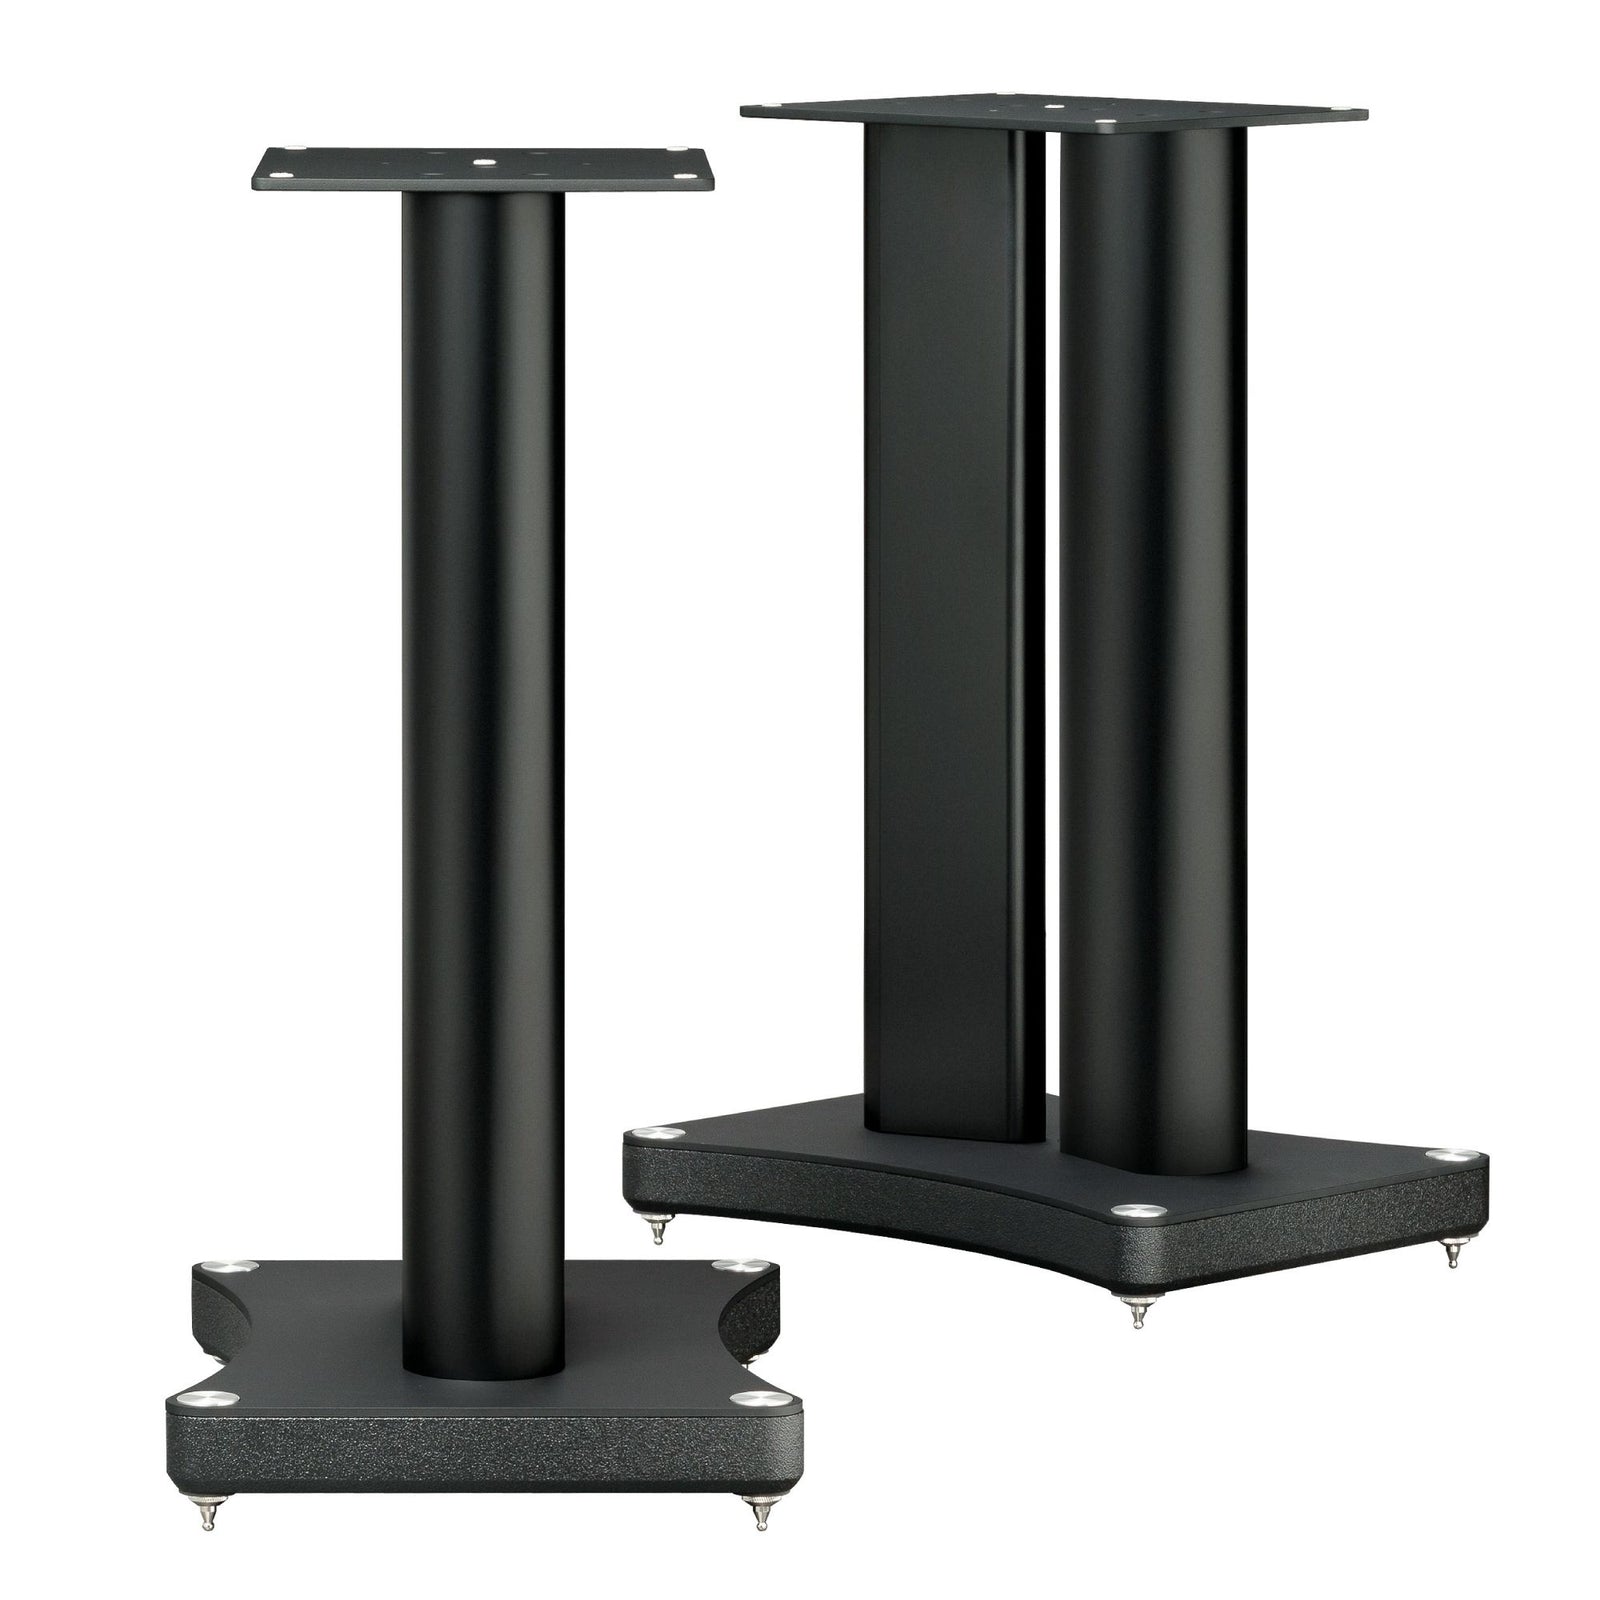 YAMAHA SPS-3000 - SPEAKER STAND | VINYL SOUND RSP RM12,000 Perfectly complementing the NS-3000 are the SPS-3000 stands. Engineered to exclusively match with the NS-3000, they enable optimal speaker placement for absolute purity of music. Specifications SPS-3000 Dimensions (W x H x D) 306×648×401 mm; 12” x 25-1/2” x 15-3/4”(with spikes), 306×629×401 mm;